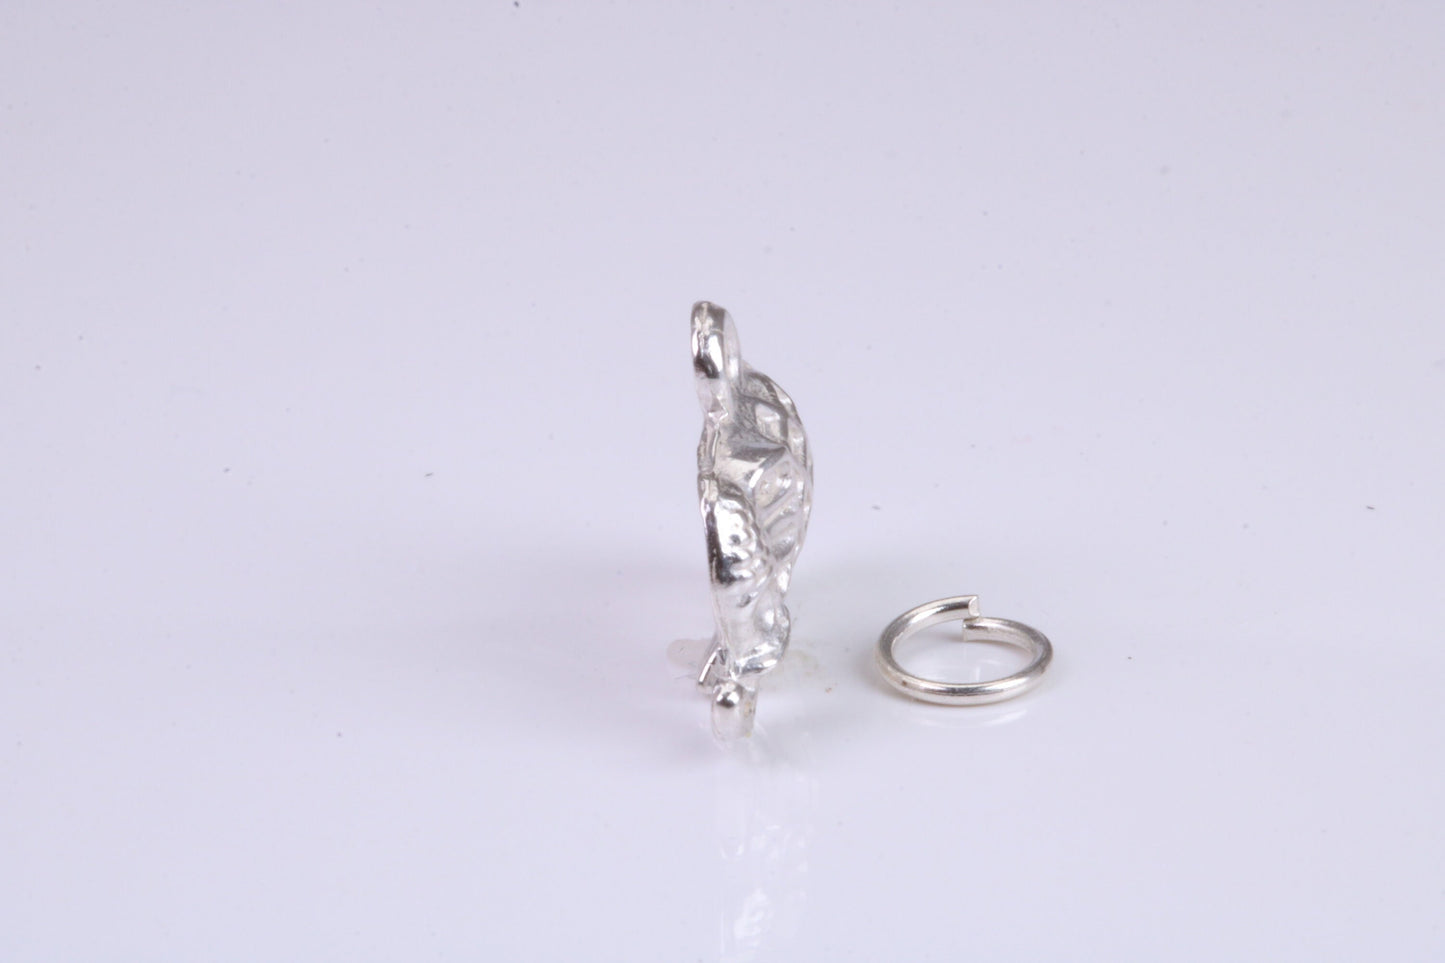 Elephant Charm, Traditional Charm, Made from Solid 925 Grade Sterling Silver, Complete with Attachment Link